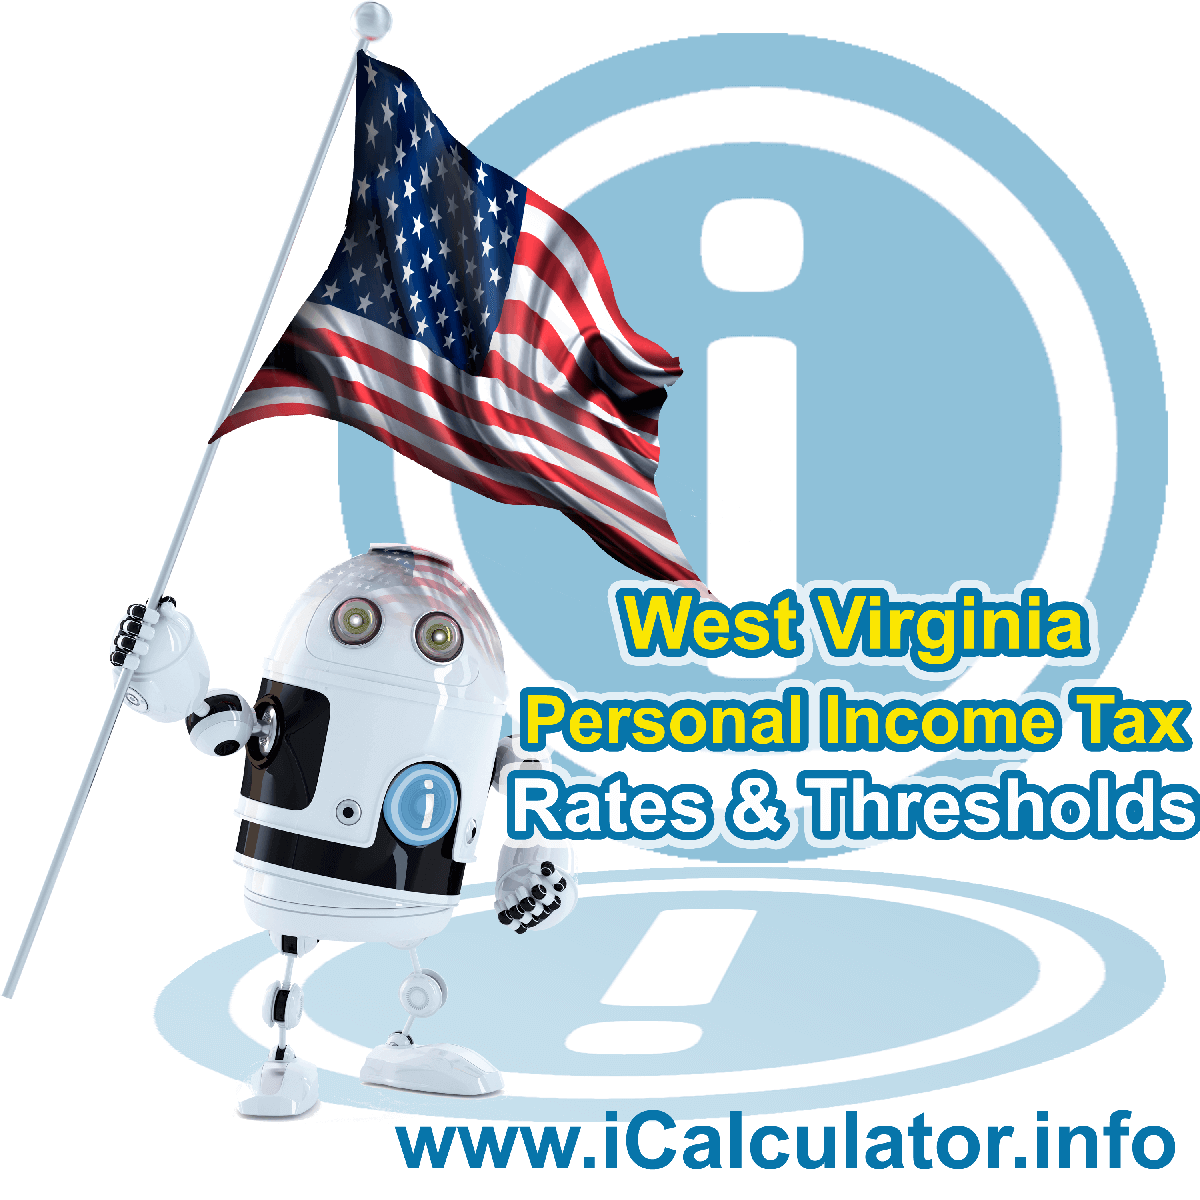 West Virginia State Tax Tables 2023. This image displays details of the West Virginia State Tax Tables for the 2023 tax return year which is provided in support of the 2023 US Tax Calculator